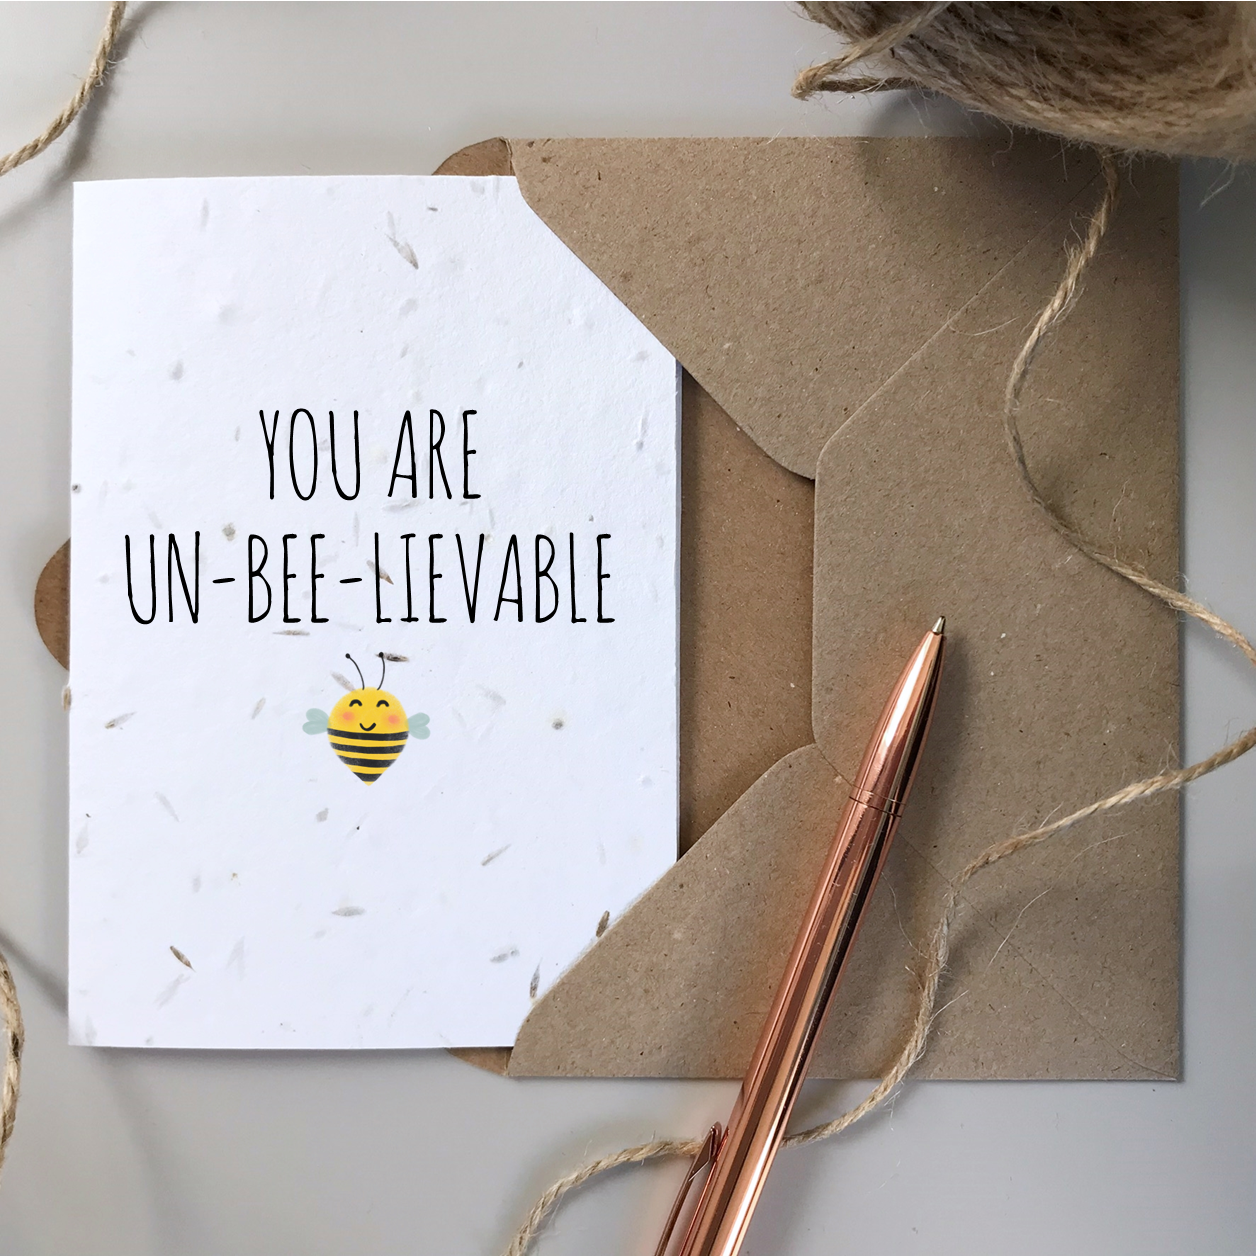 You are un-bee-lievable